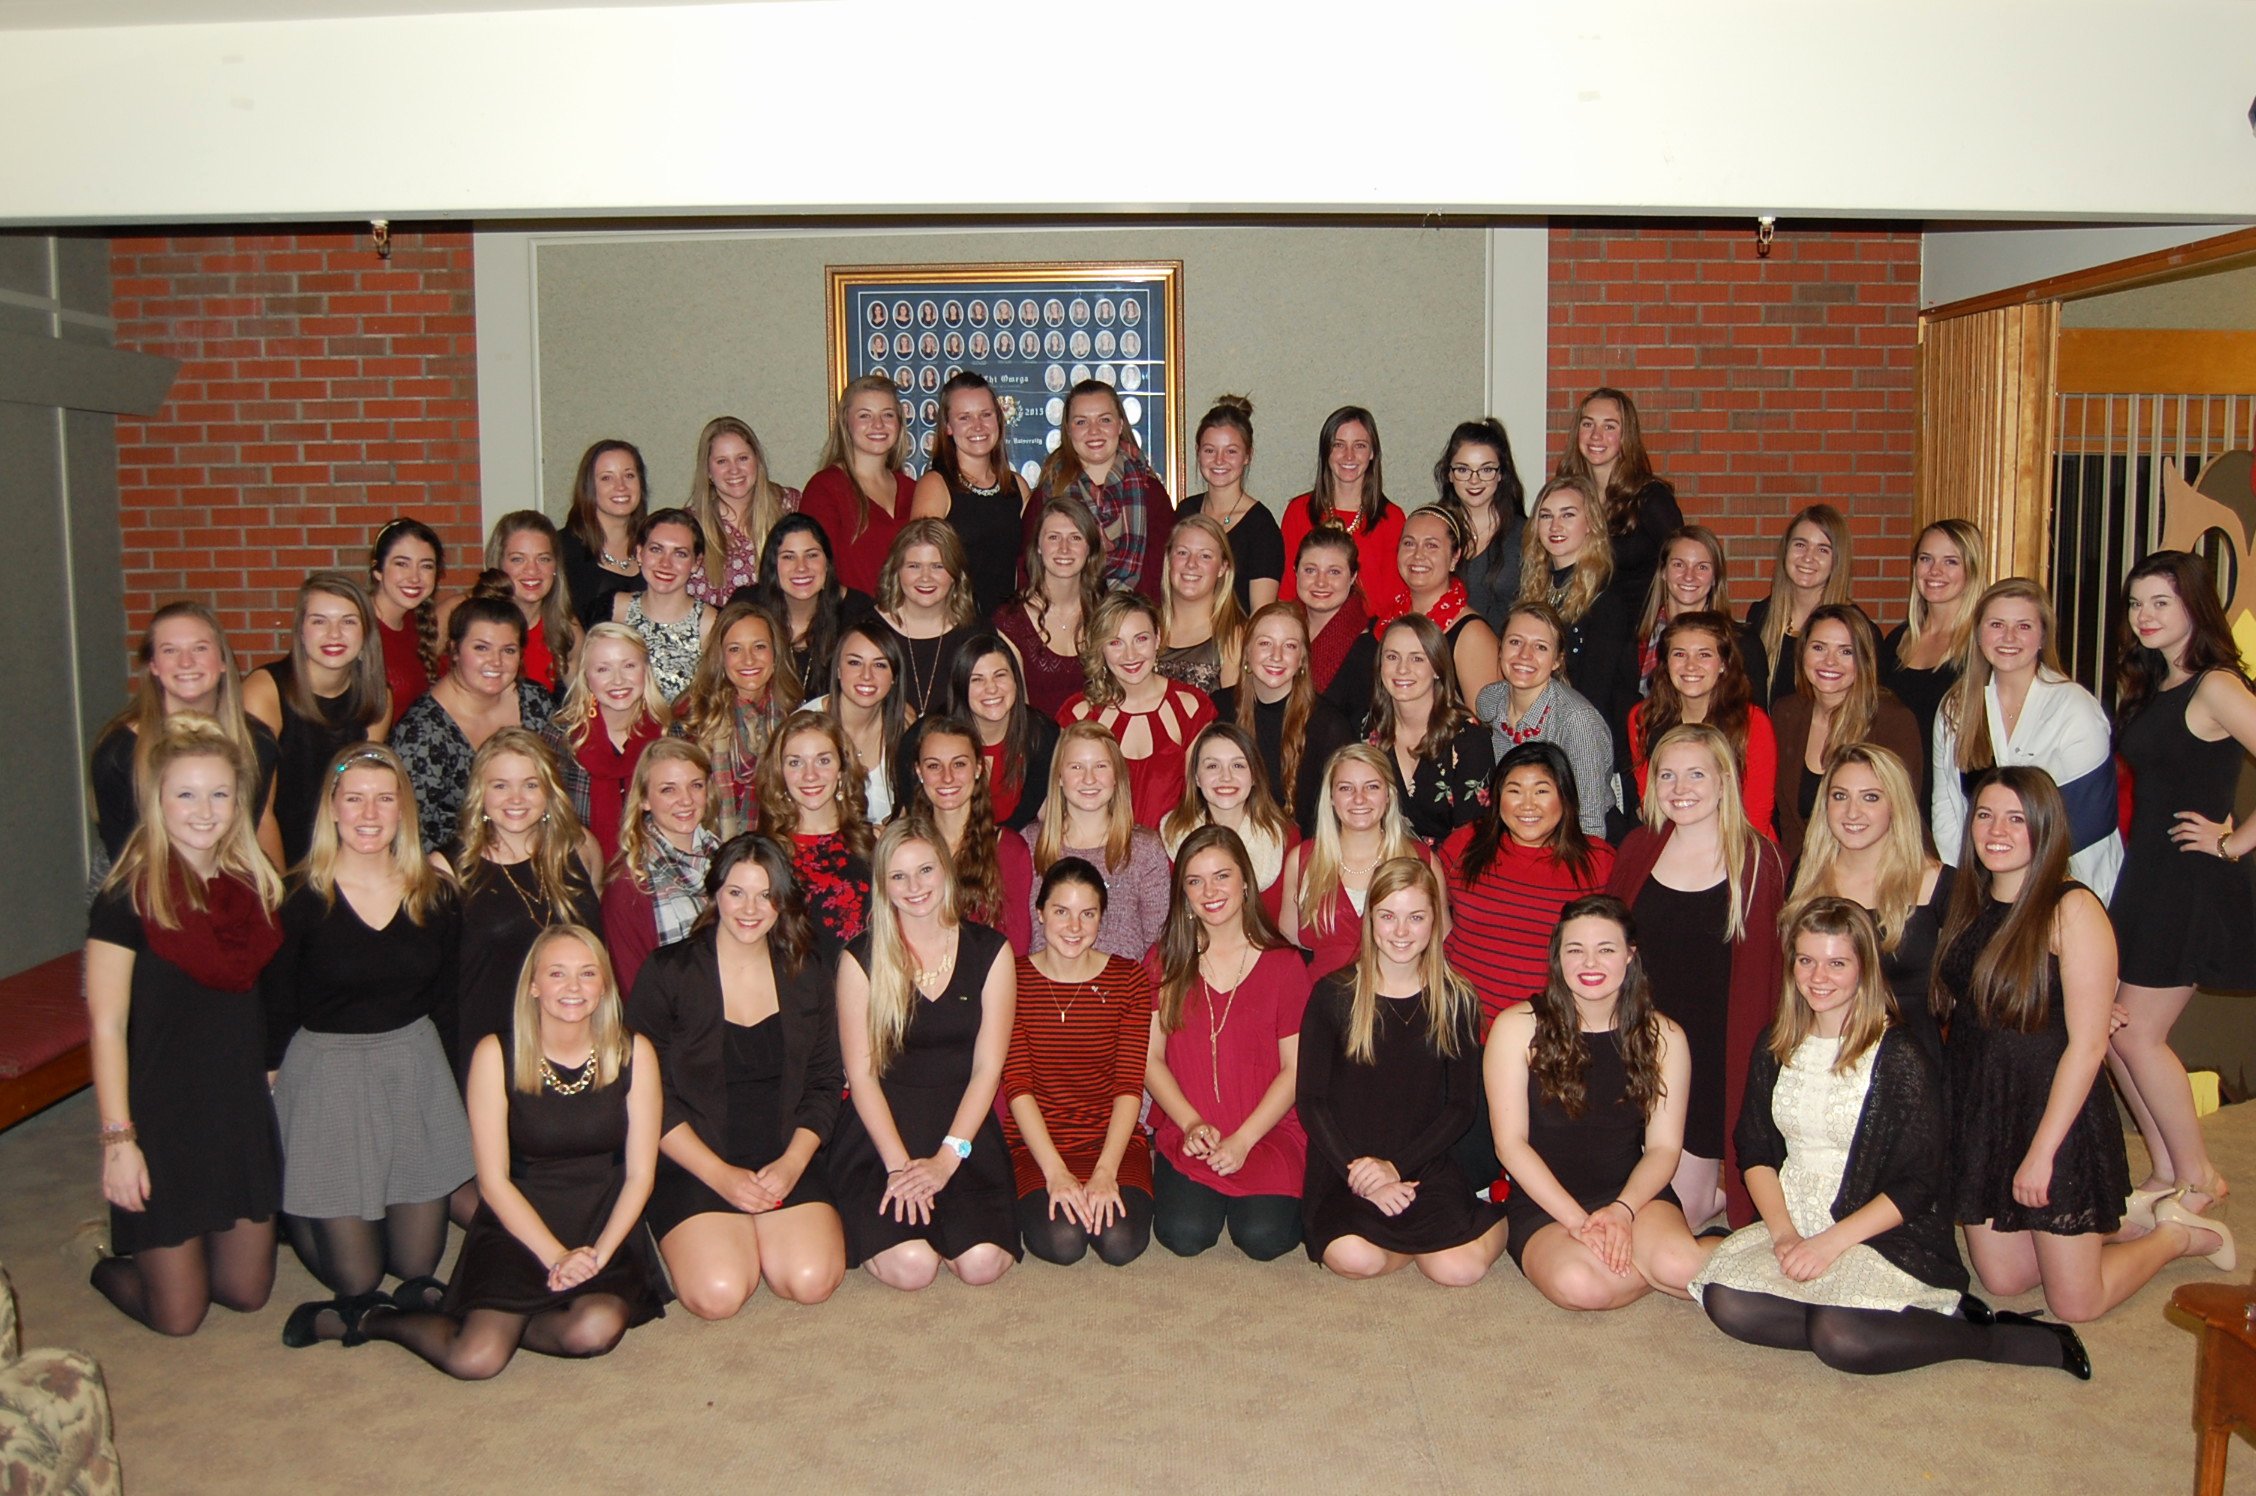 Chi Omega Letter Of Recommendation Inspirational Alpha Chi Omega Fraternity and sorority Life Ml